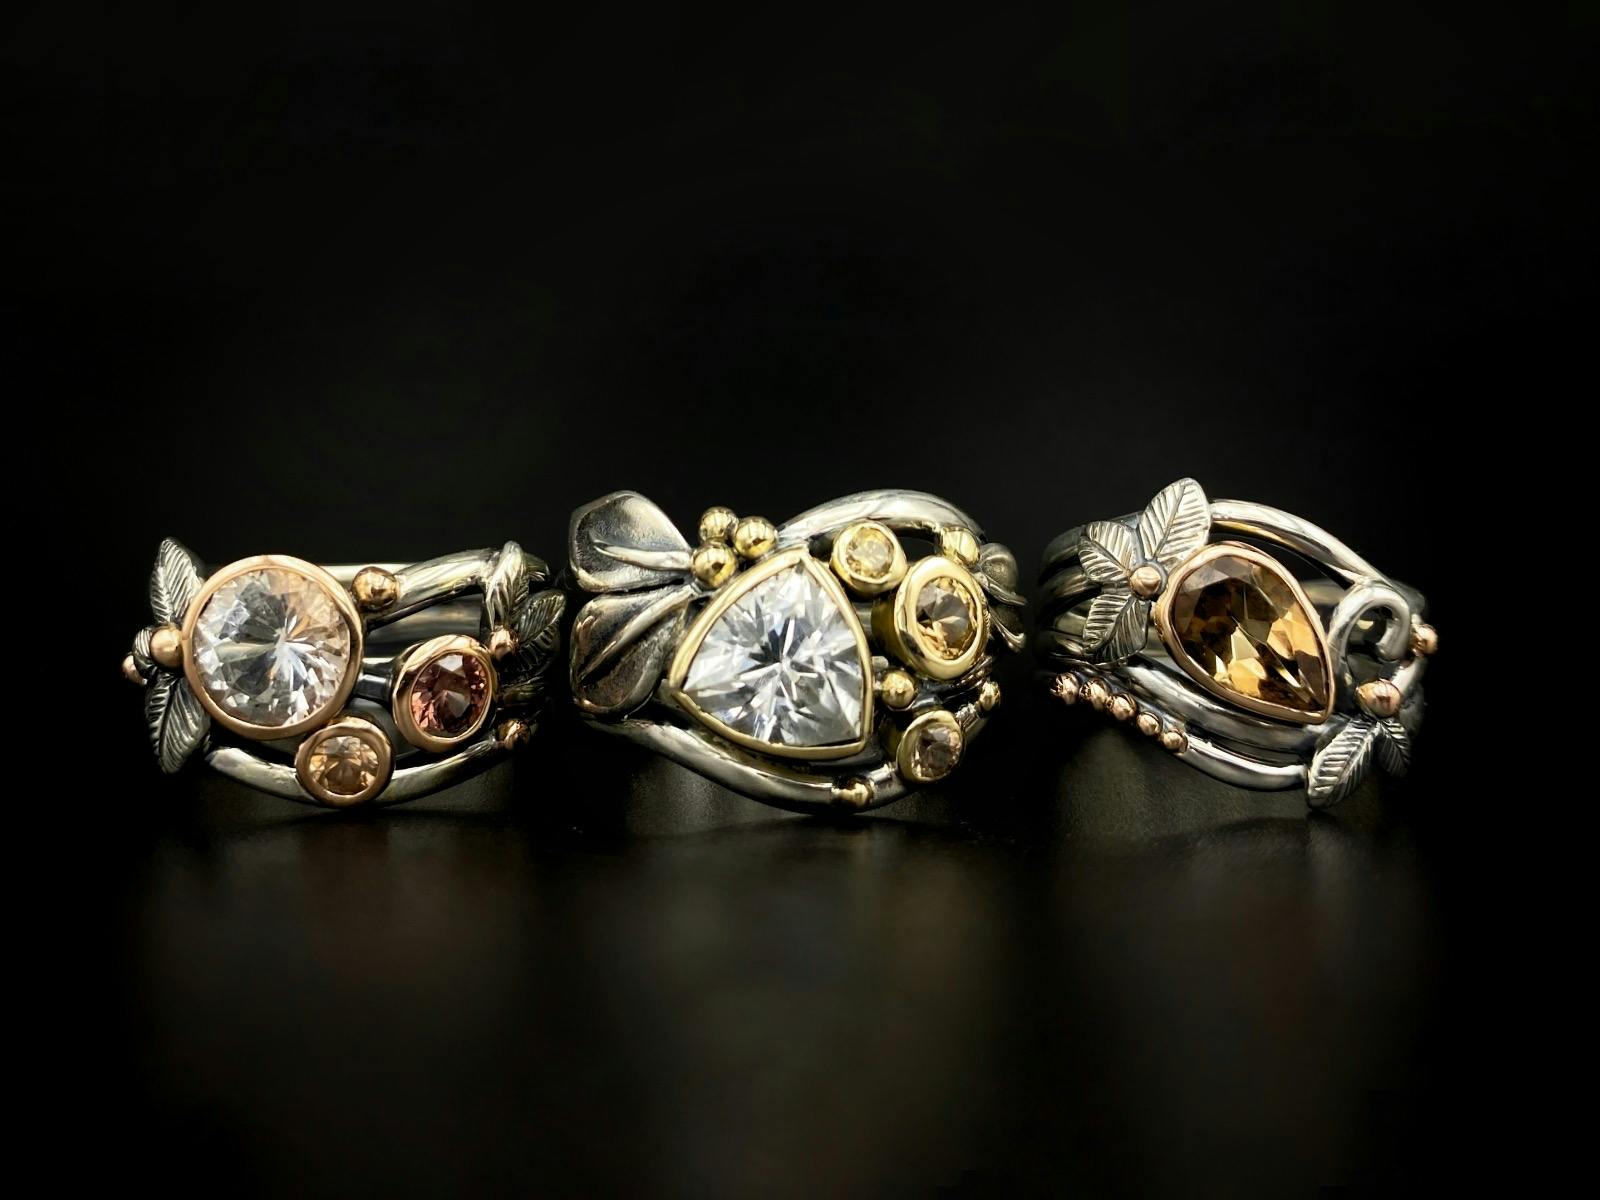 Three rings with gemstones and silver floral embellishments